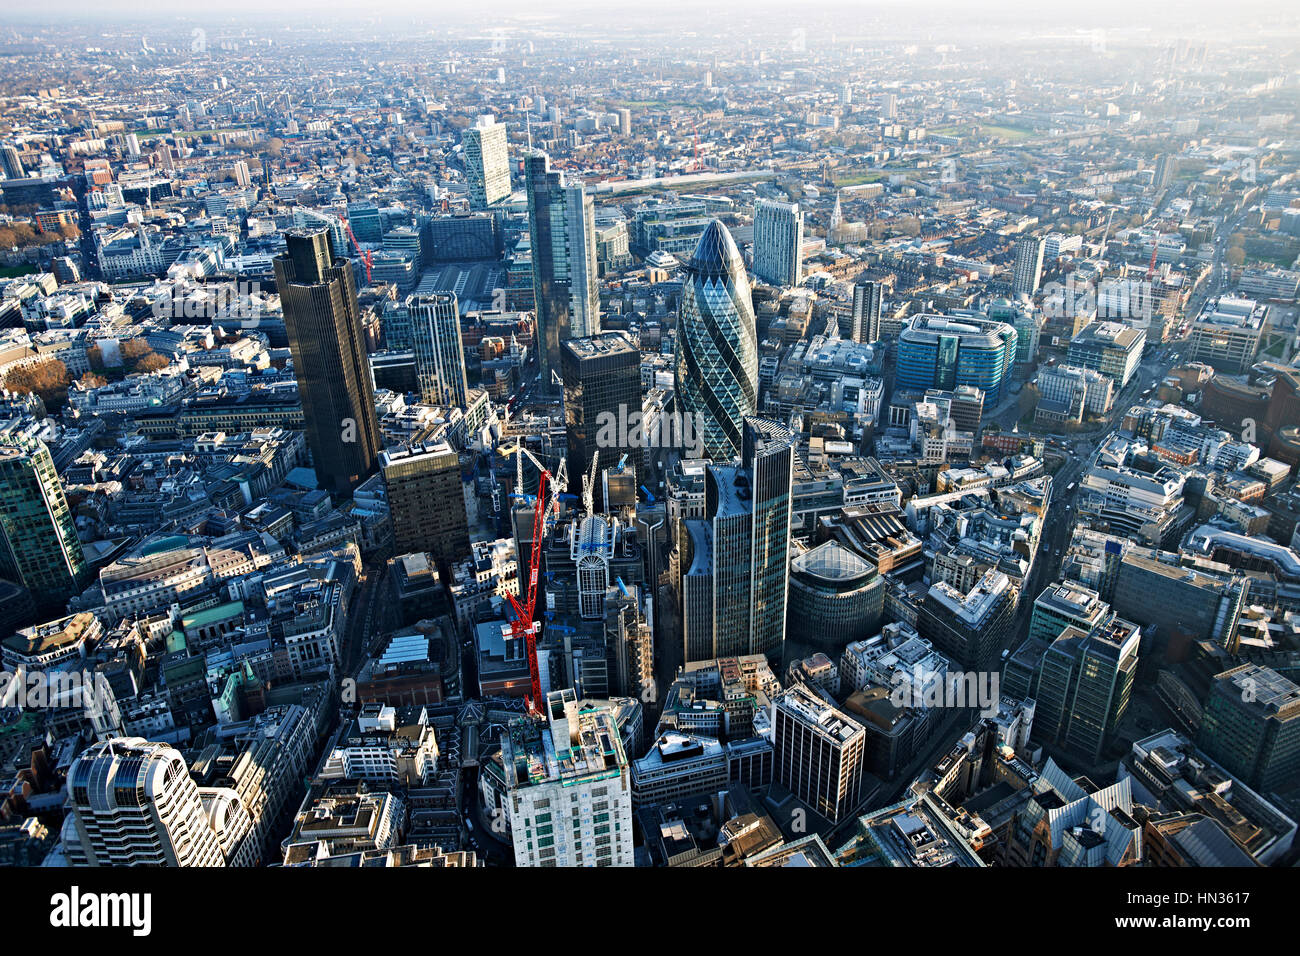 Aerial view of the city of London showing the Gherkin and Lloyds of London. Stock Photo